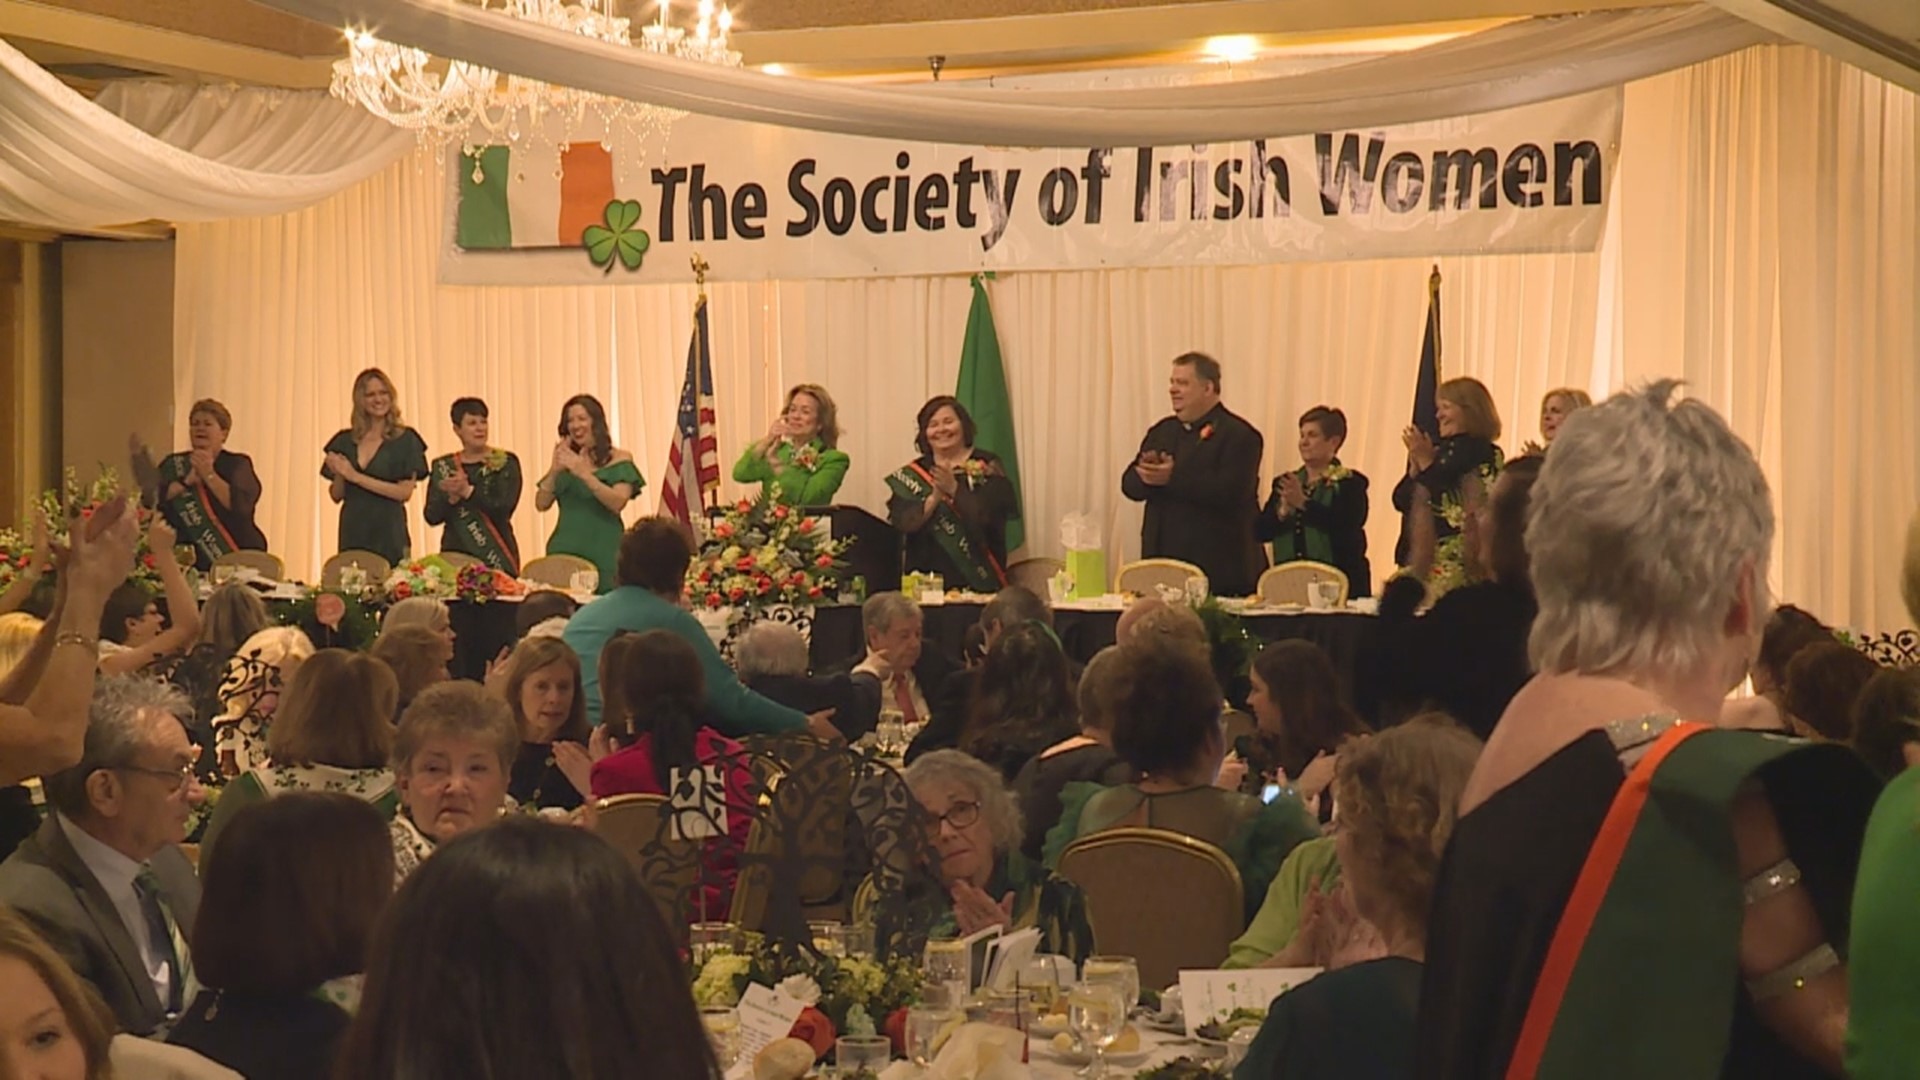 The Friendly Sons of Saint Patrick and The Society of Irish Women both held dinners.